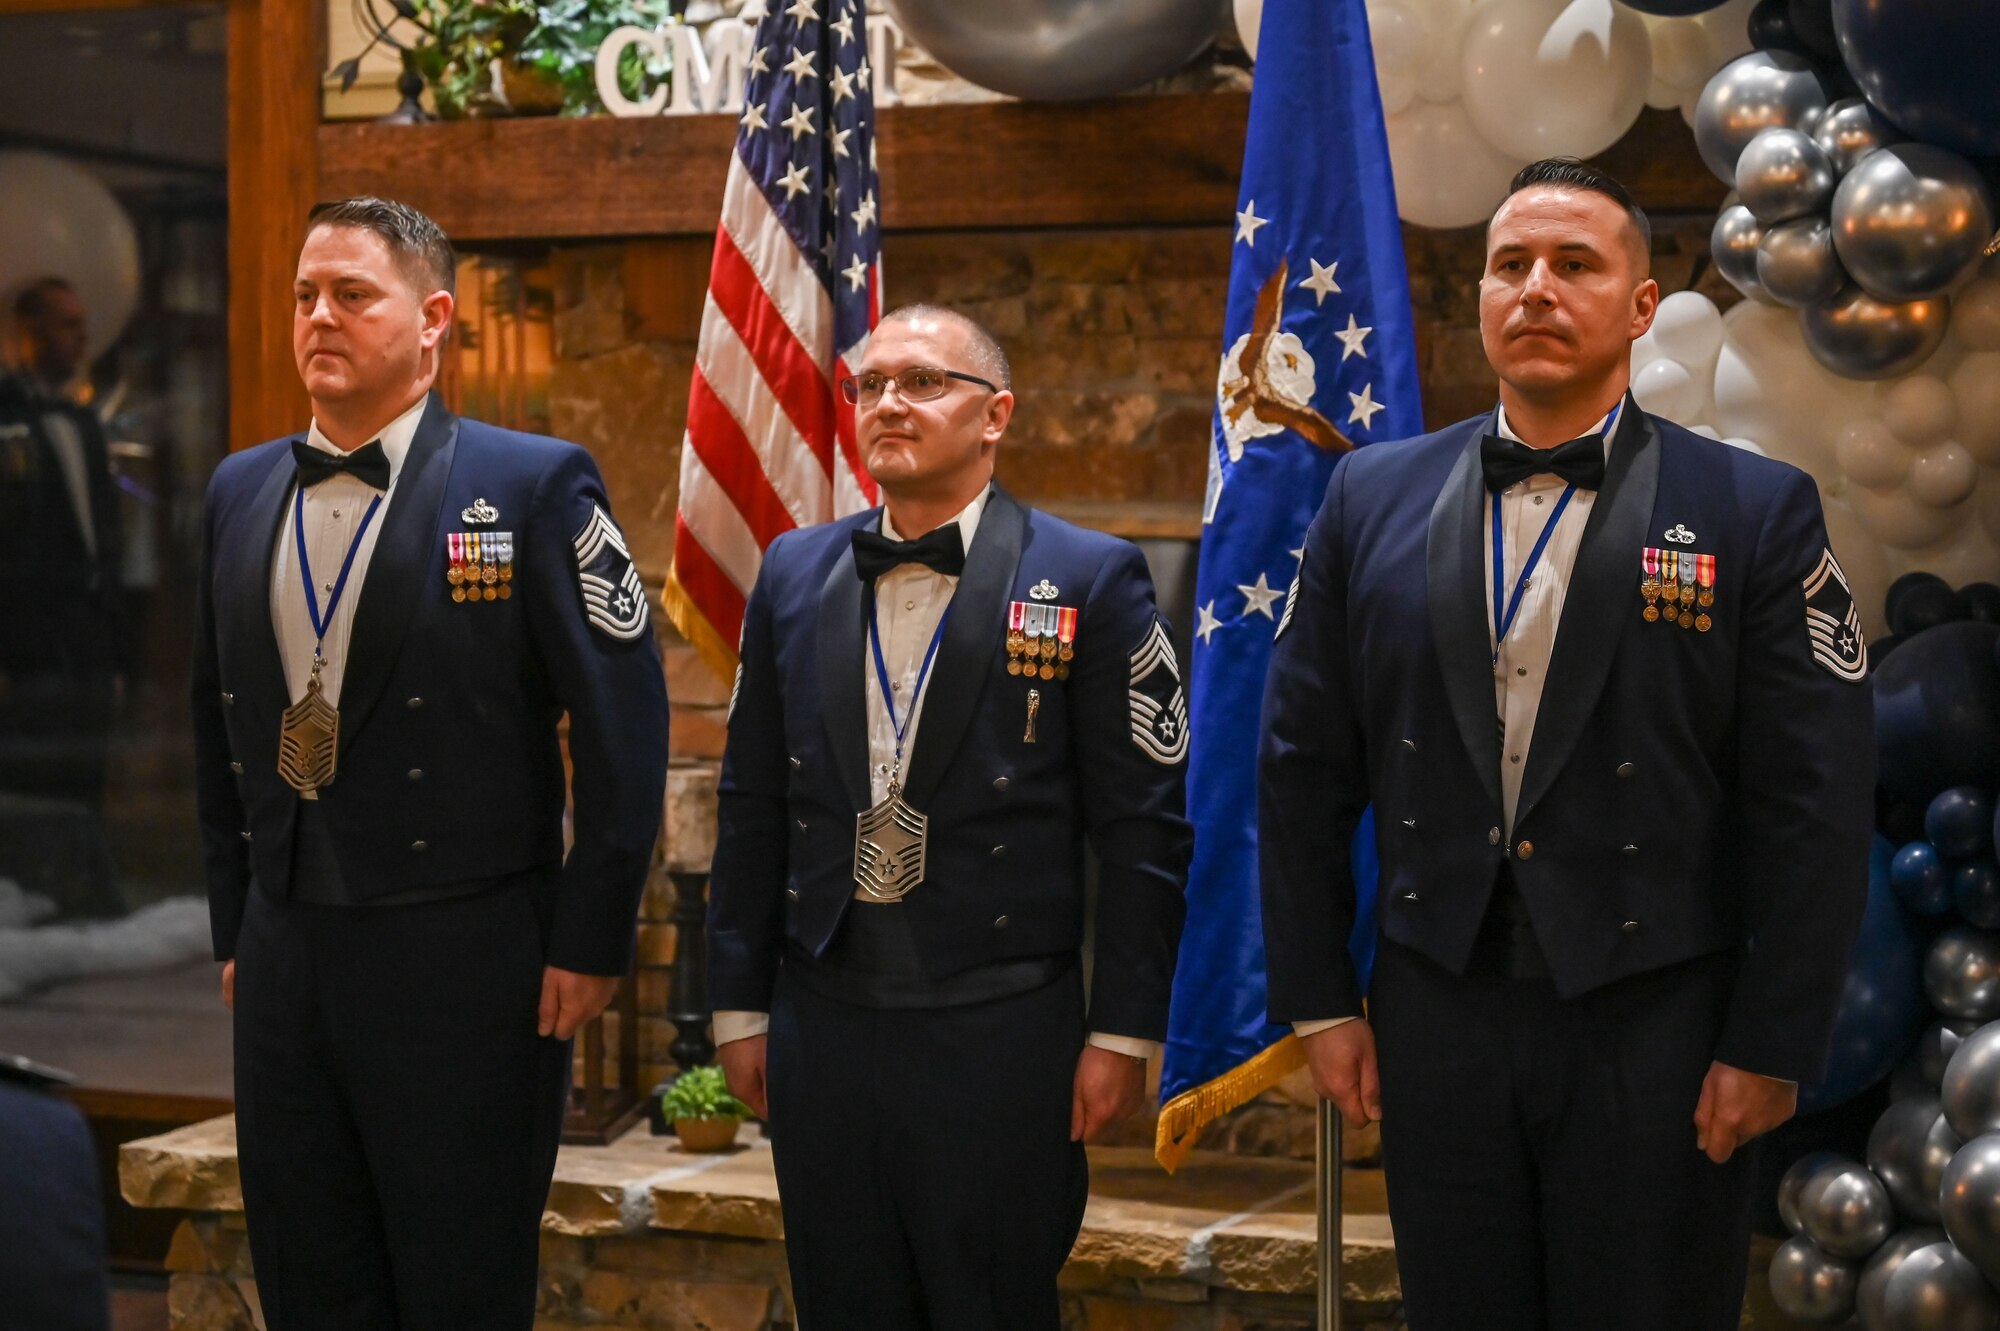 Hill Air Force Base's newest chiefs and chief select recognized at a Chief Induction Ceremony March 31, 2023, in Ogden, Utah.